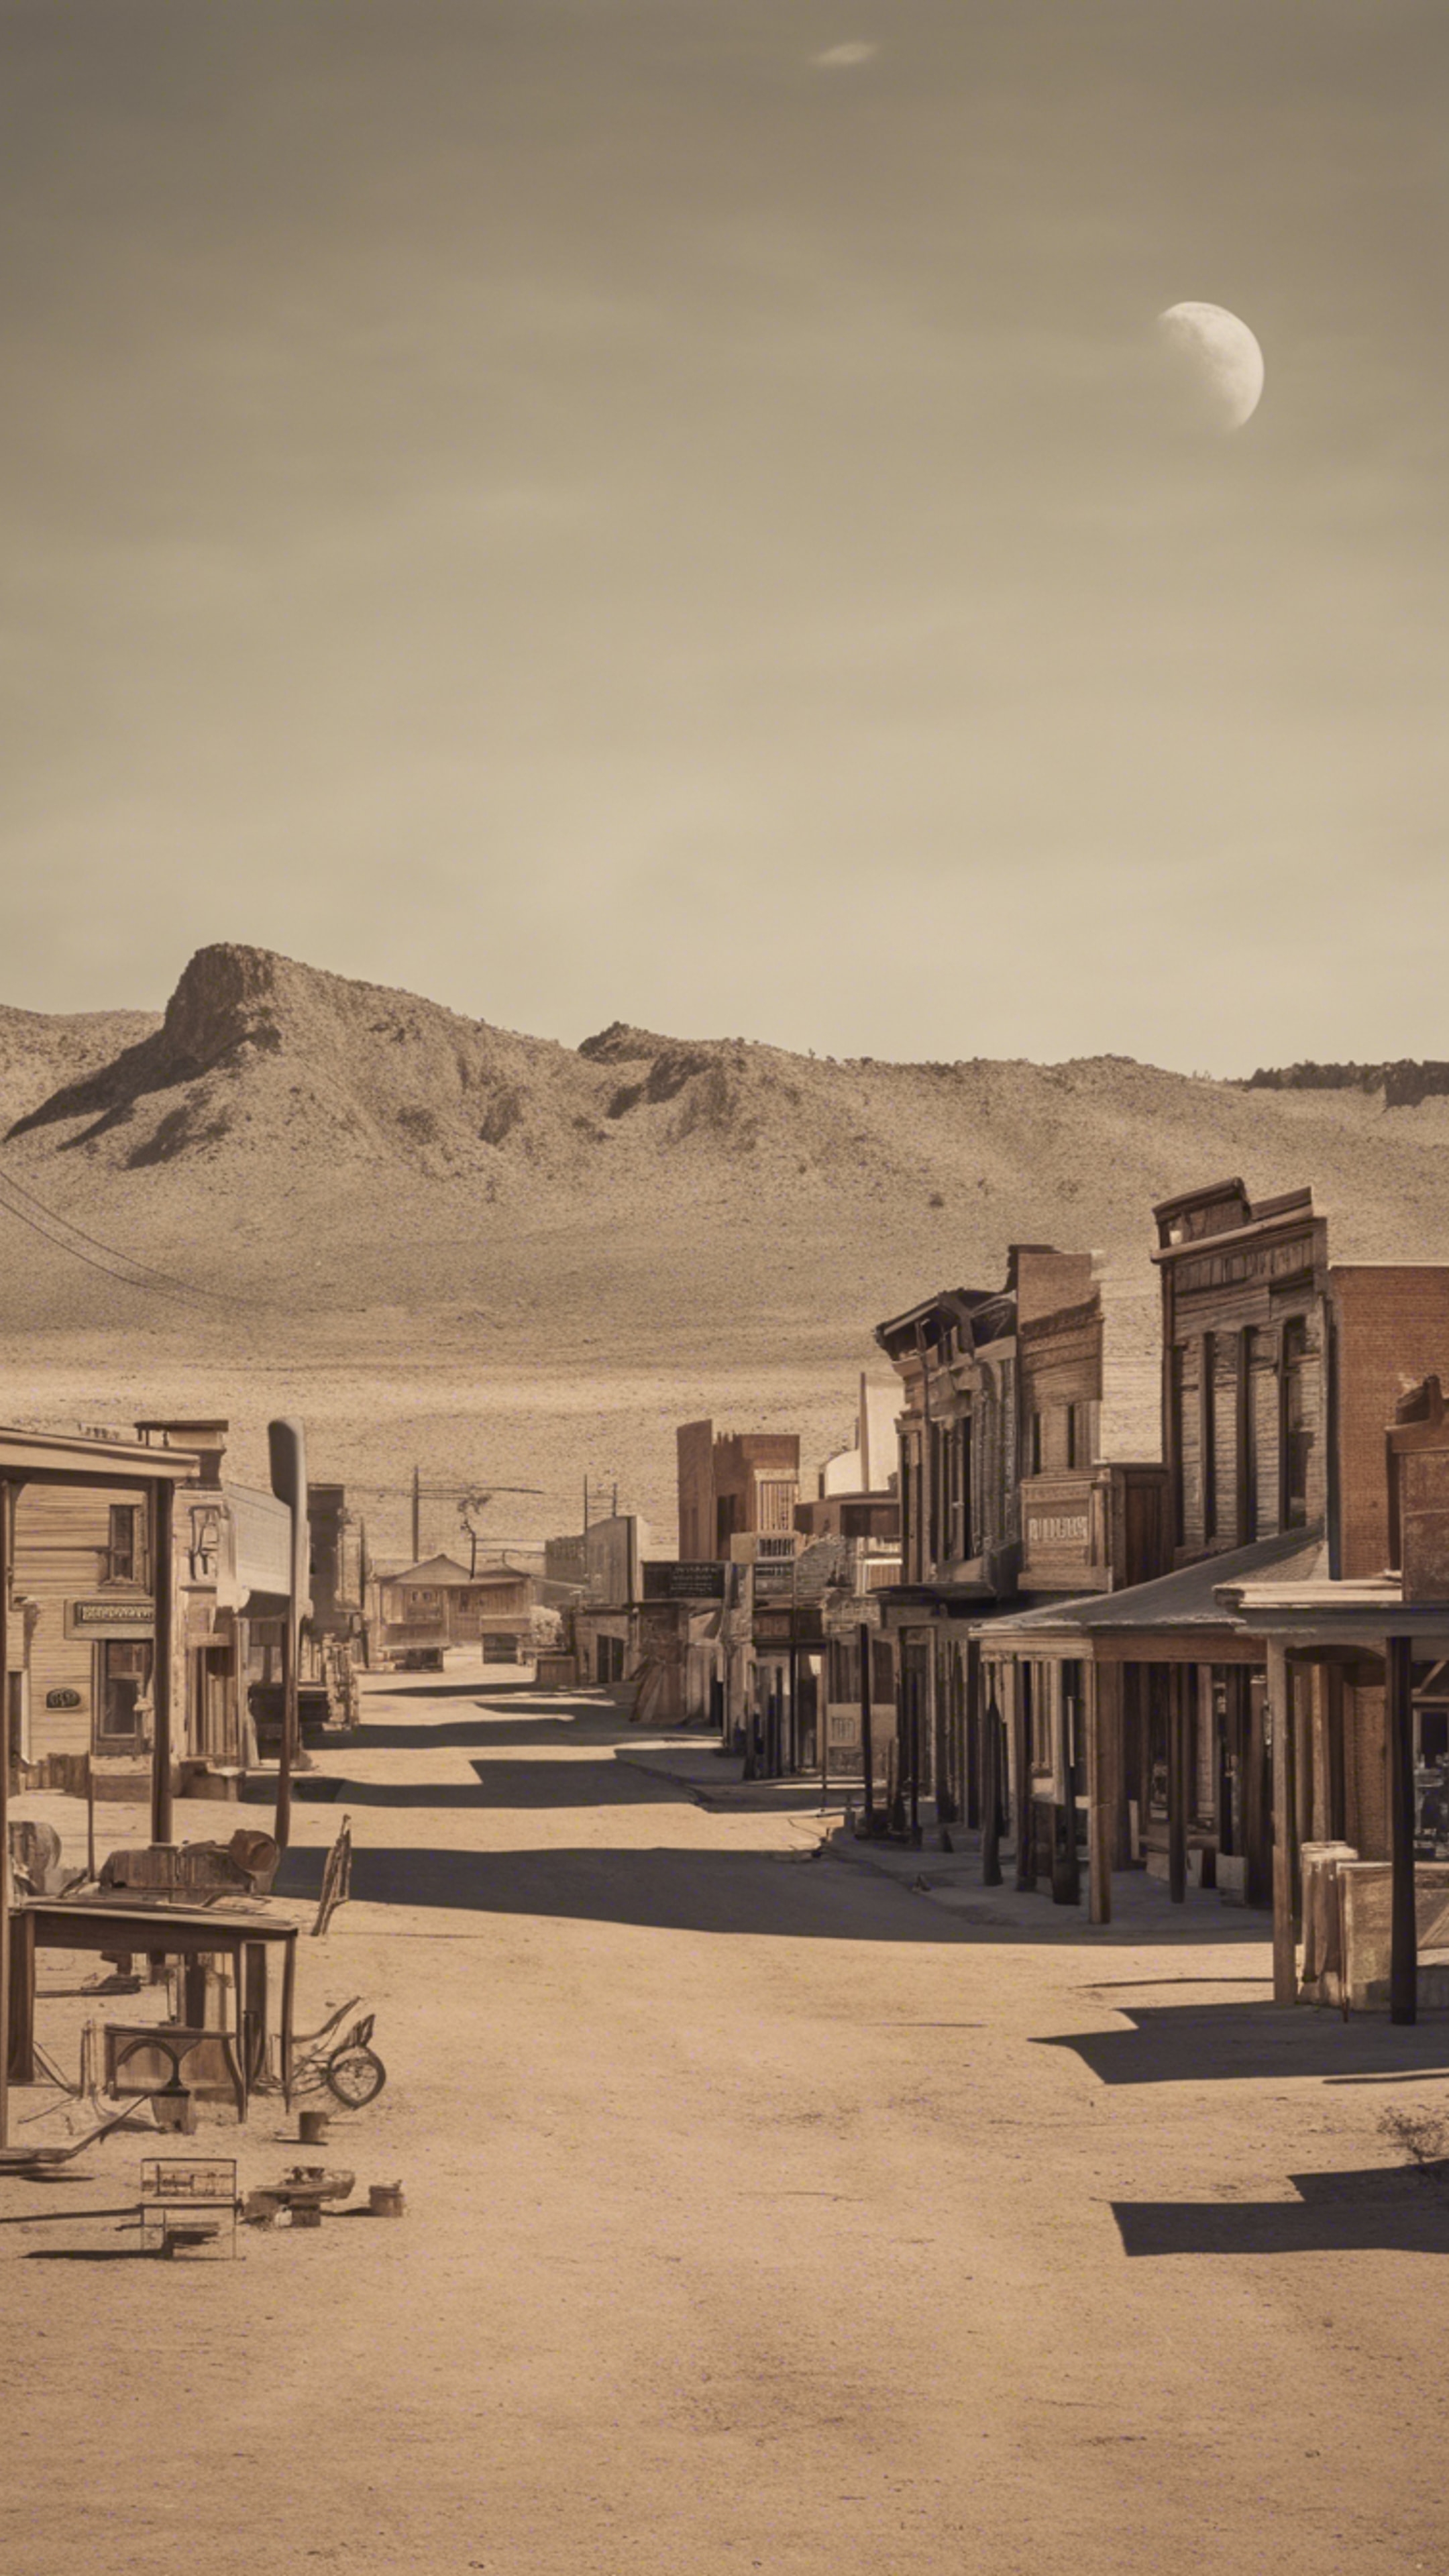 A nostalgic portrayal of a deserted old western town skyline at high noon. Валлпапер[6f3773f399464a7985e4]